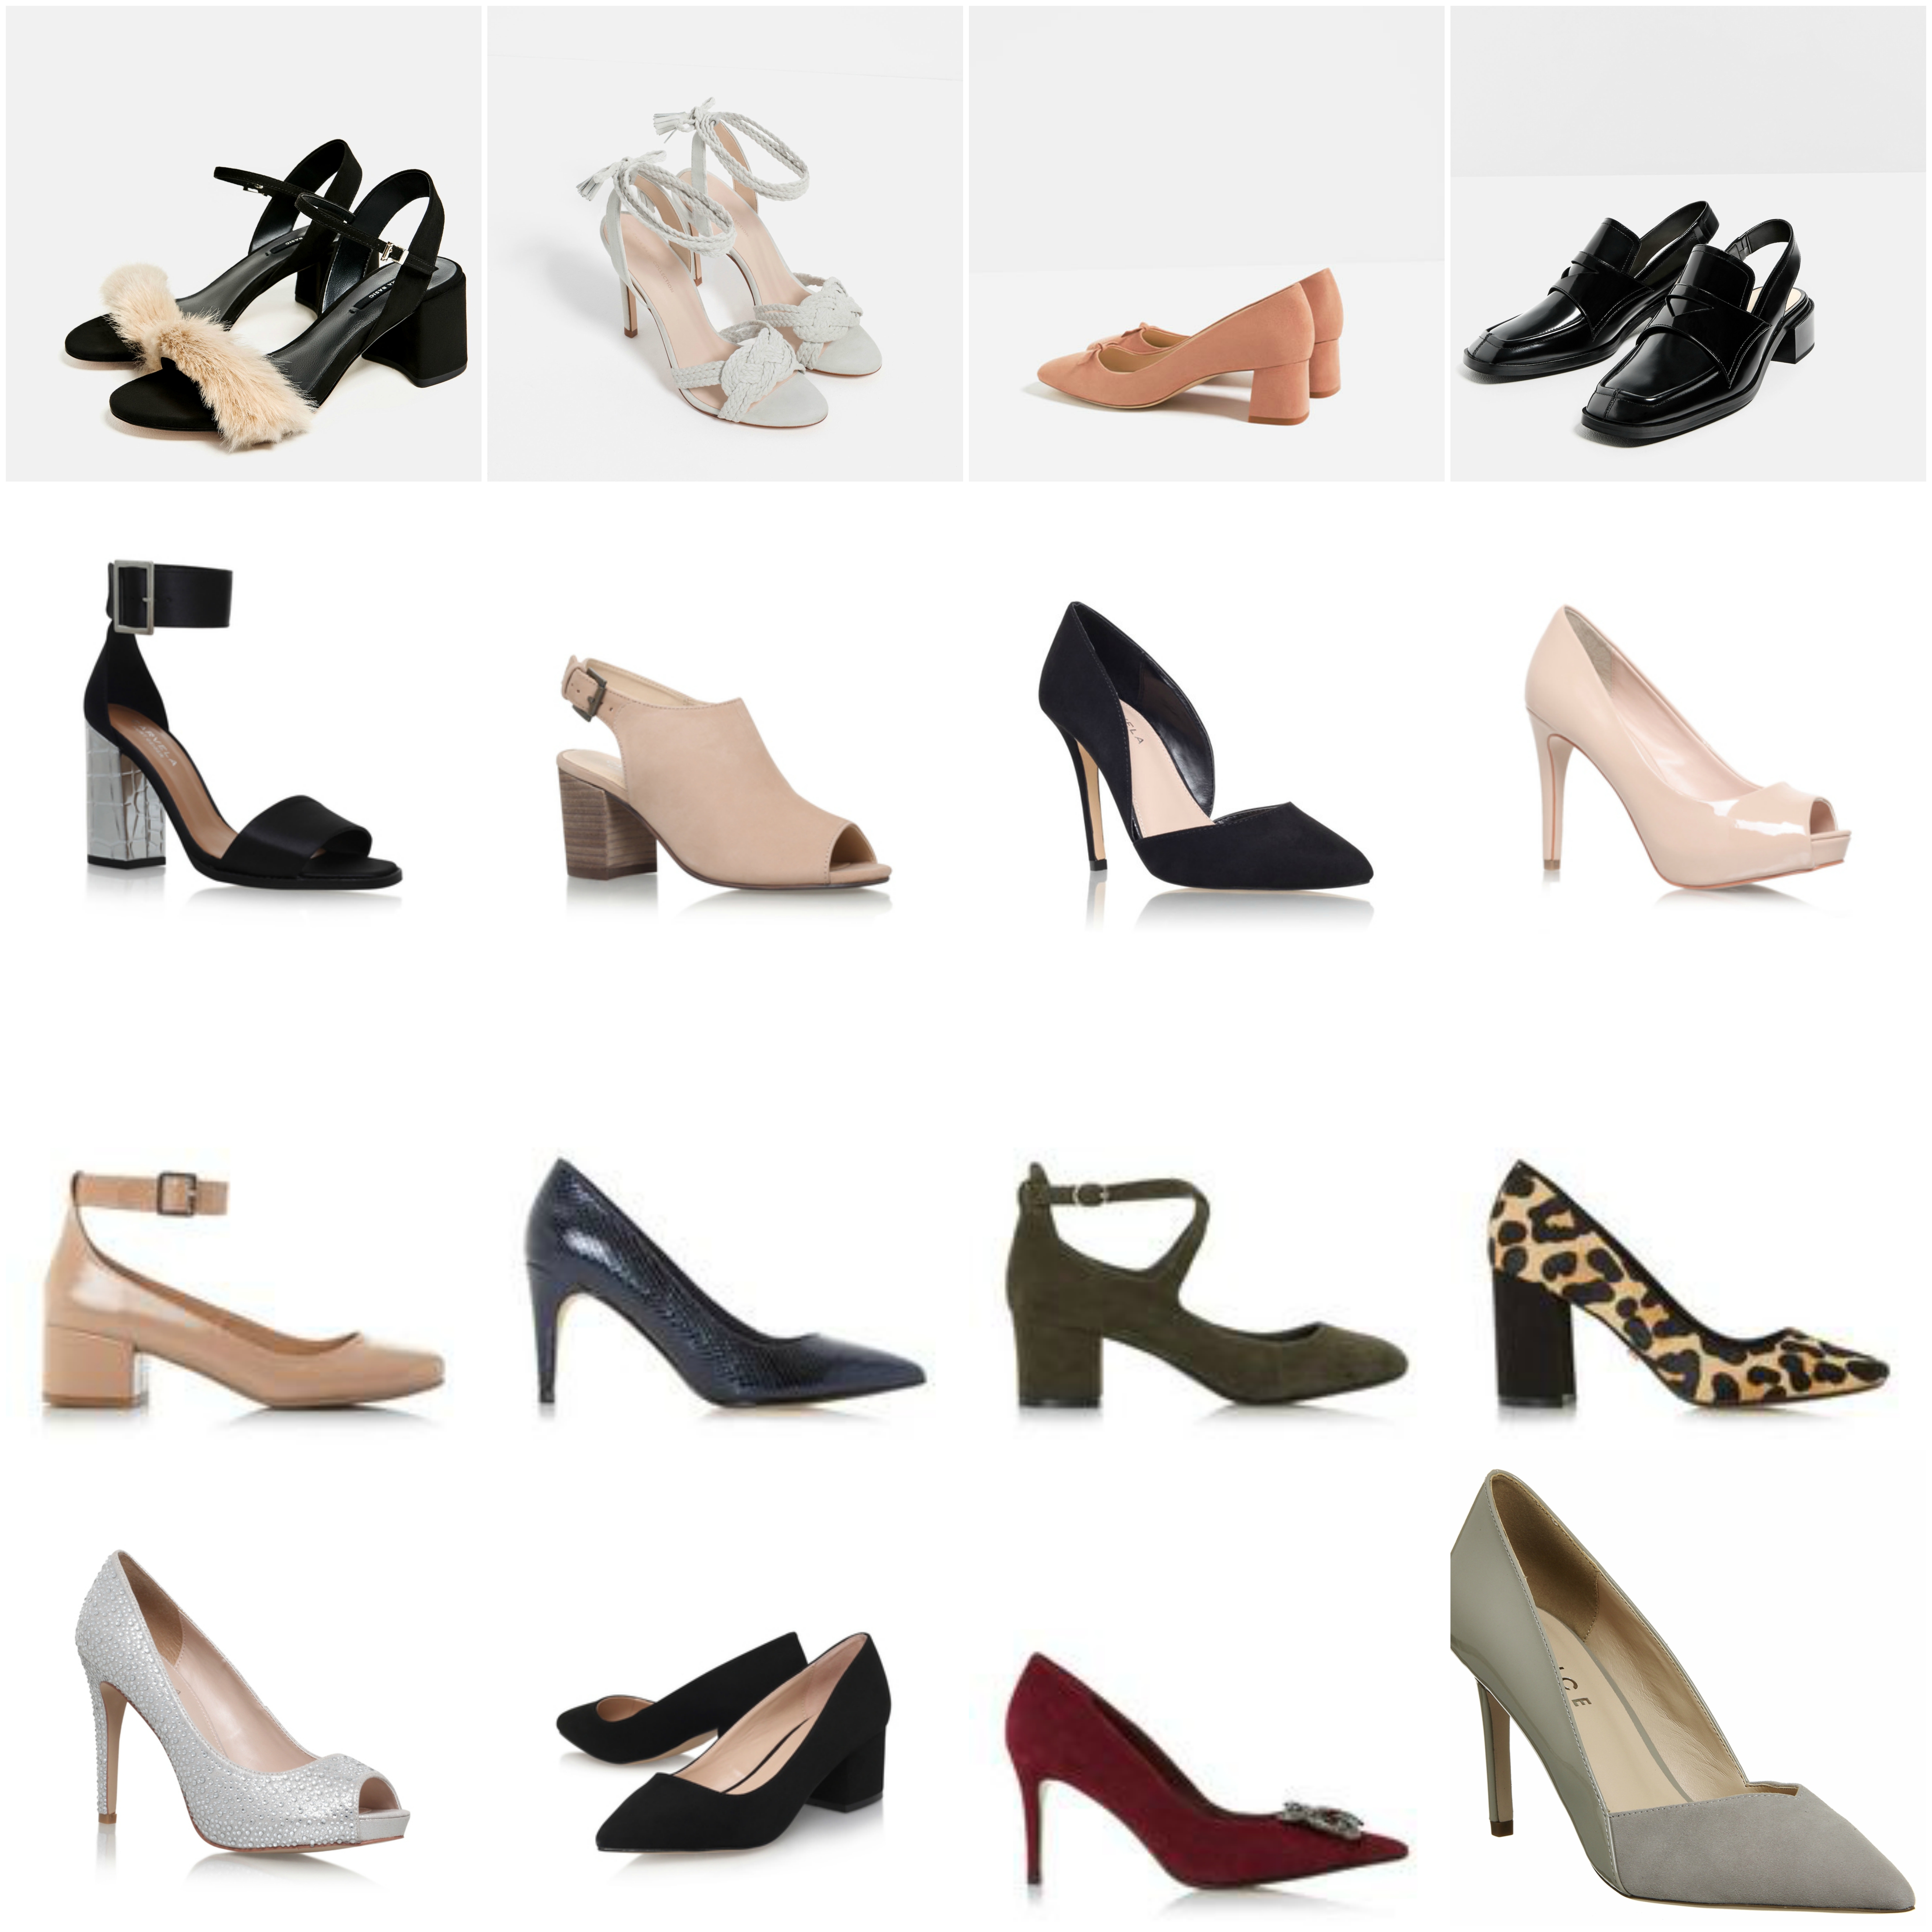 product grid of comfortable heels